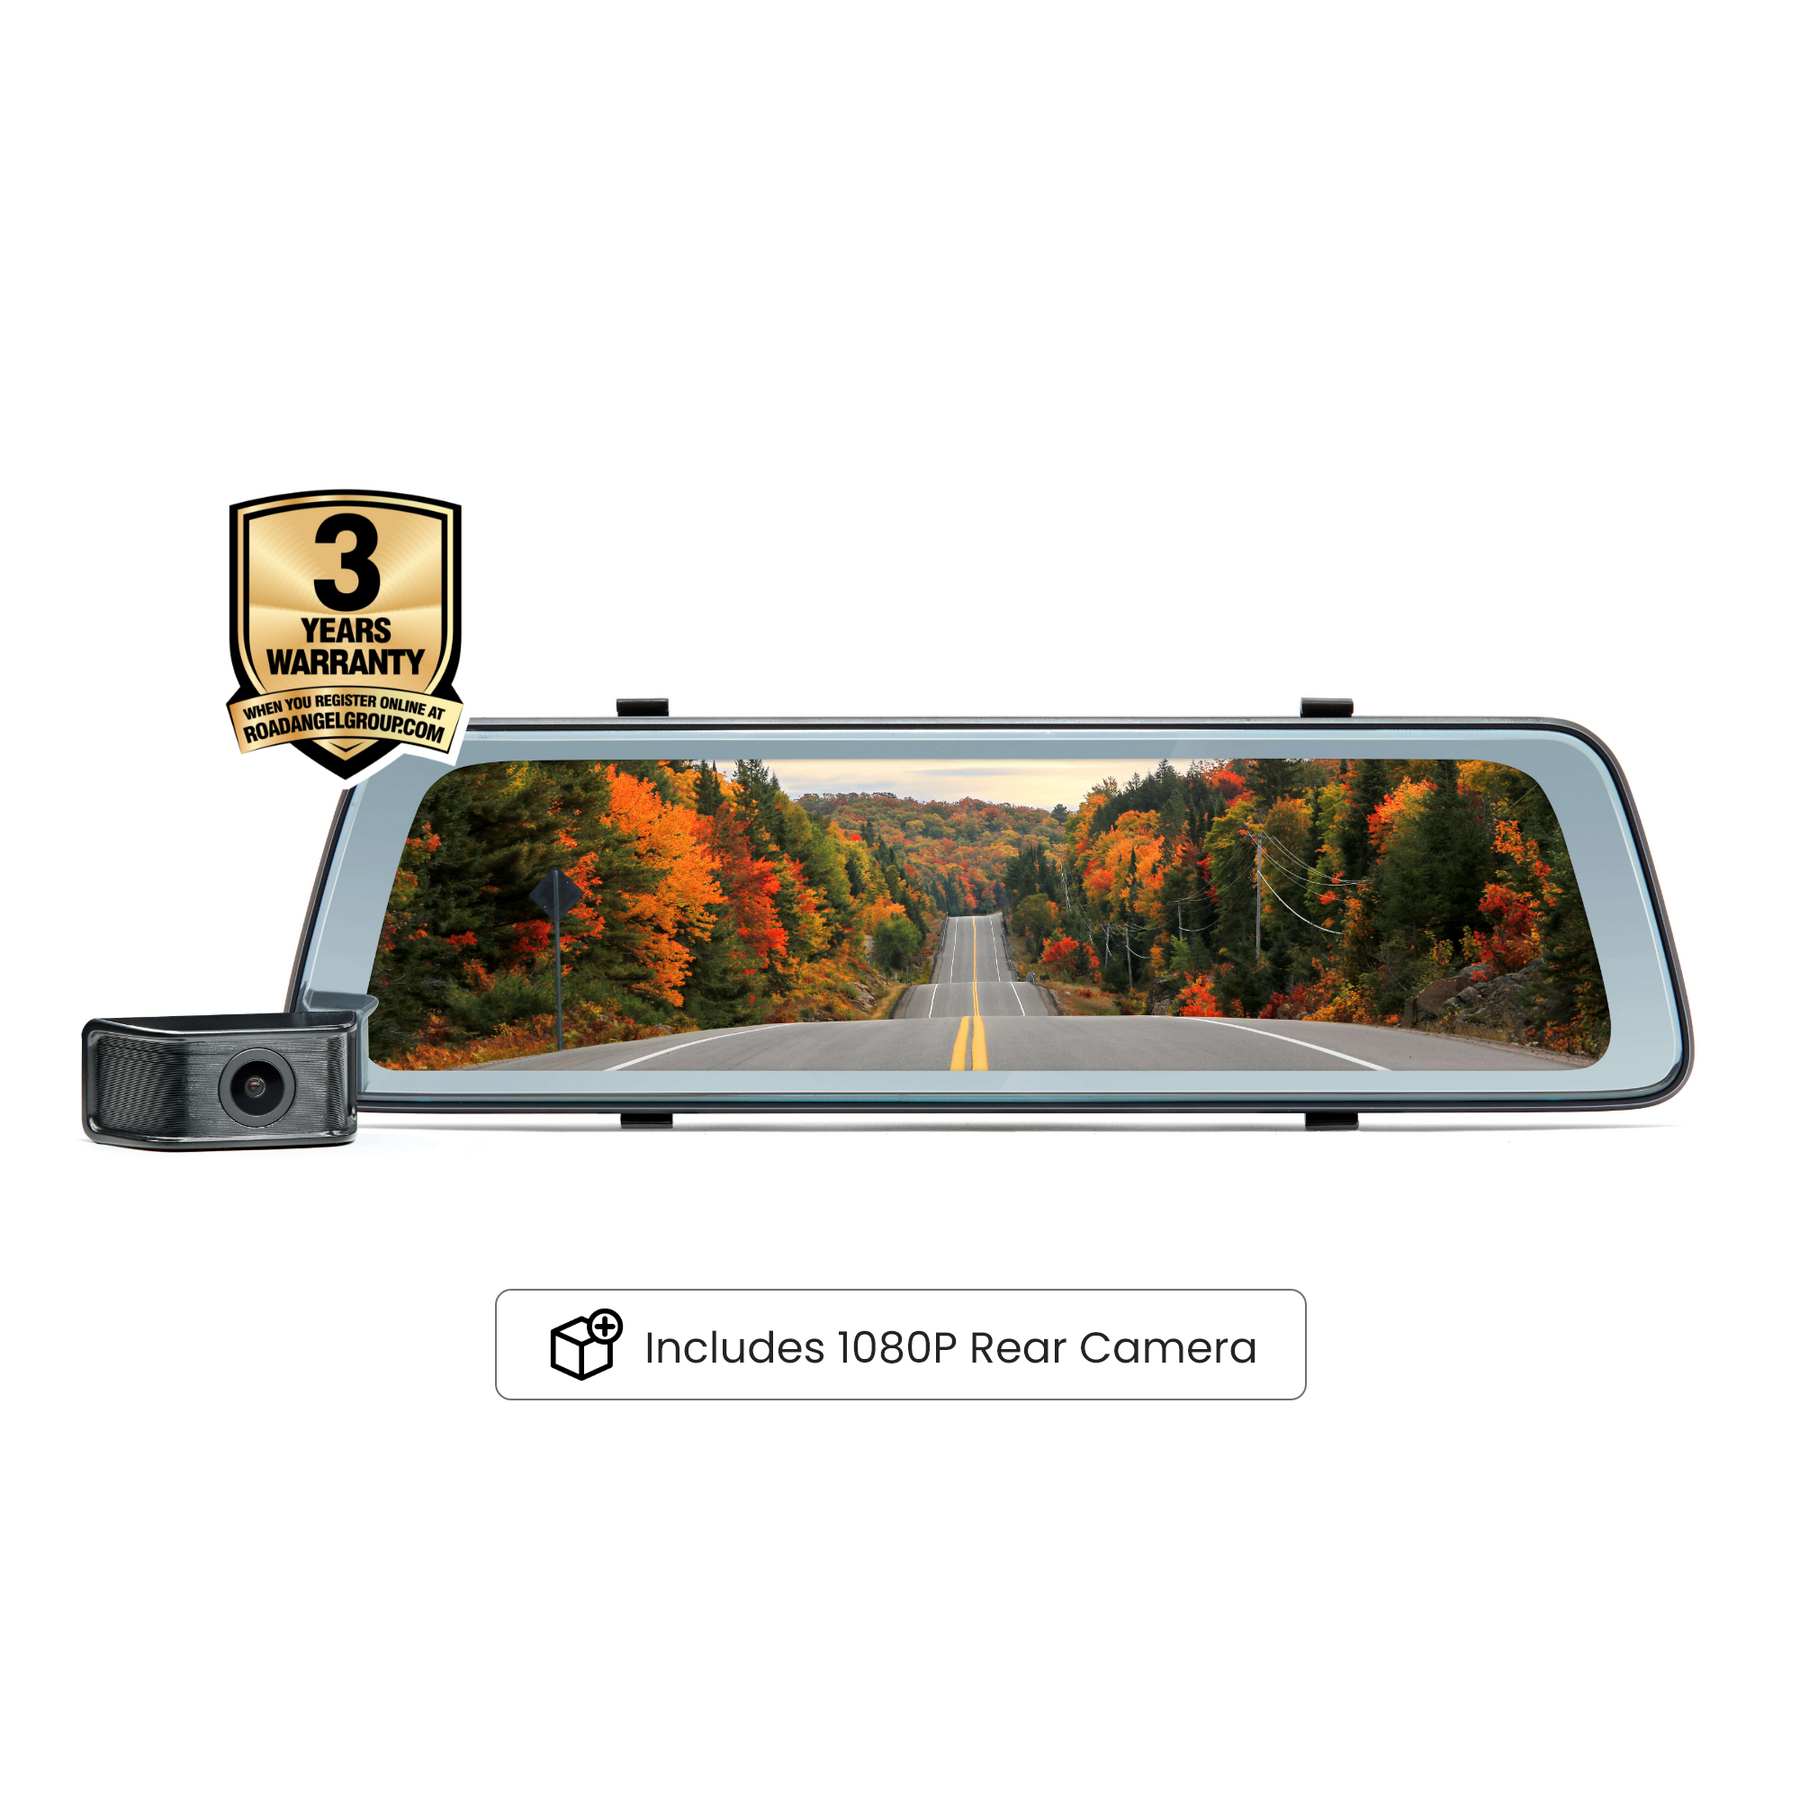 Road Angel Halo Vision Rear View Mirror and Dash Cam with SD Card & Hardwiring Kit Bundle